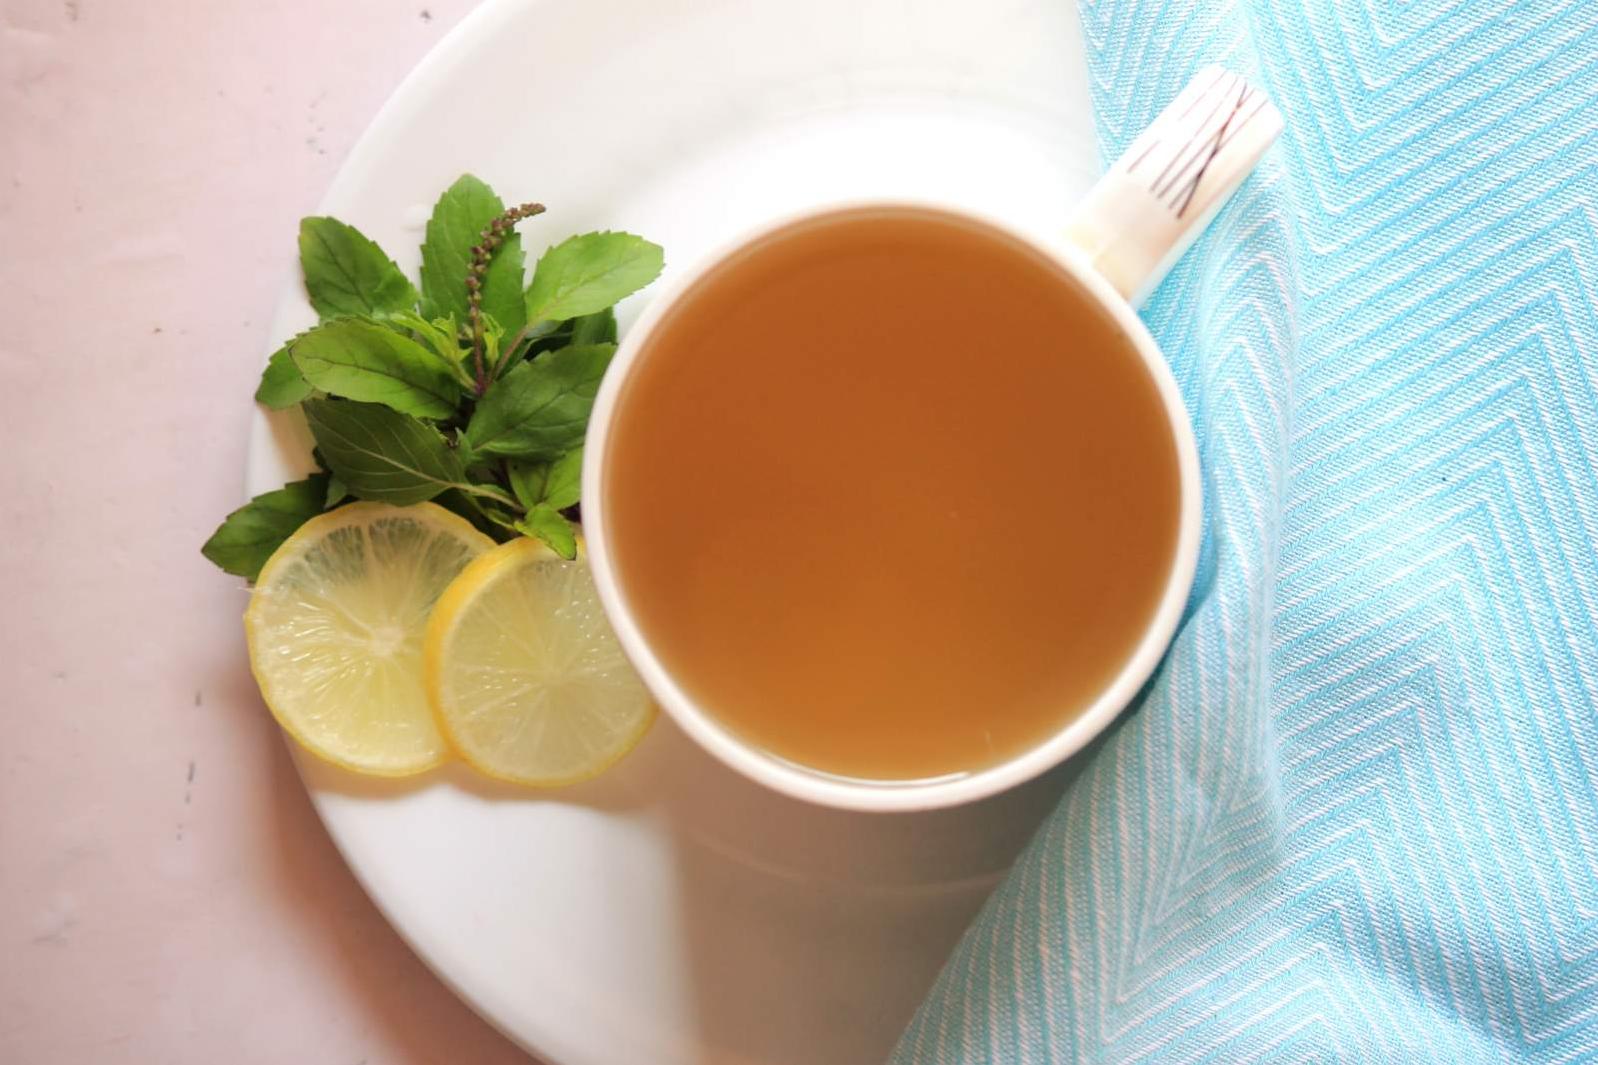  This tea is a perfect balance of sweet and savory flavors.